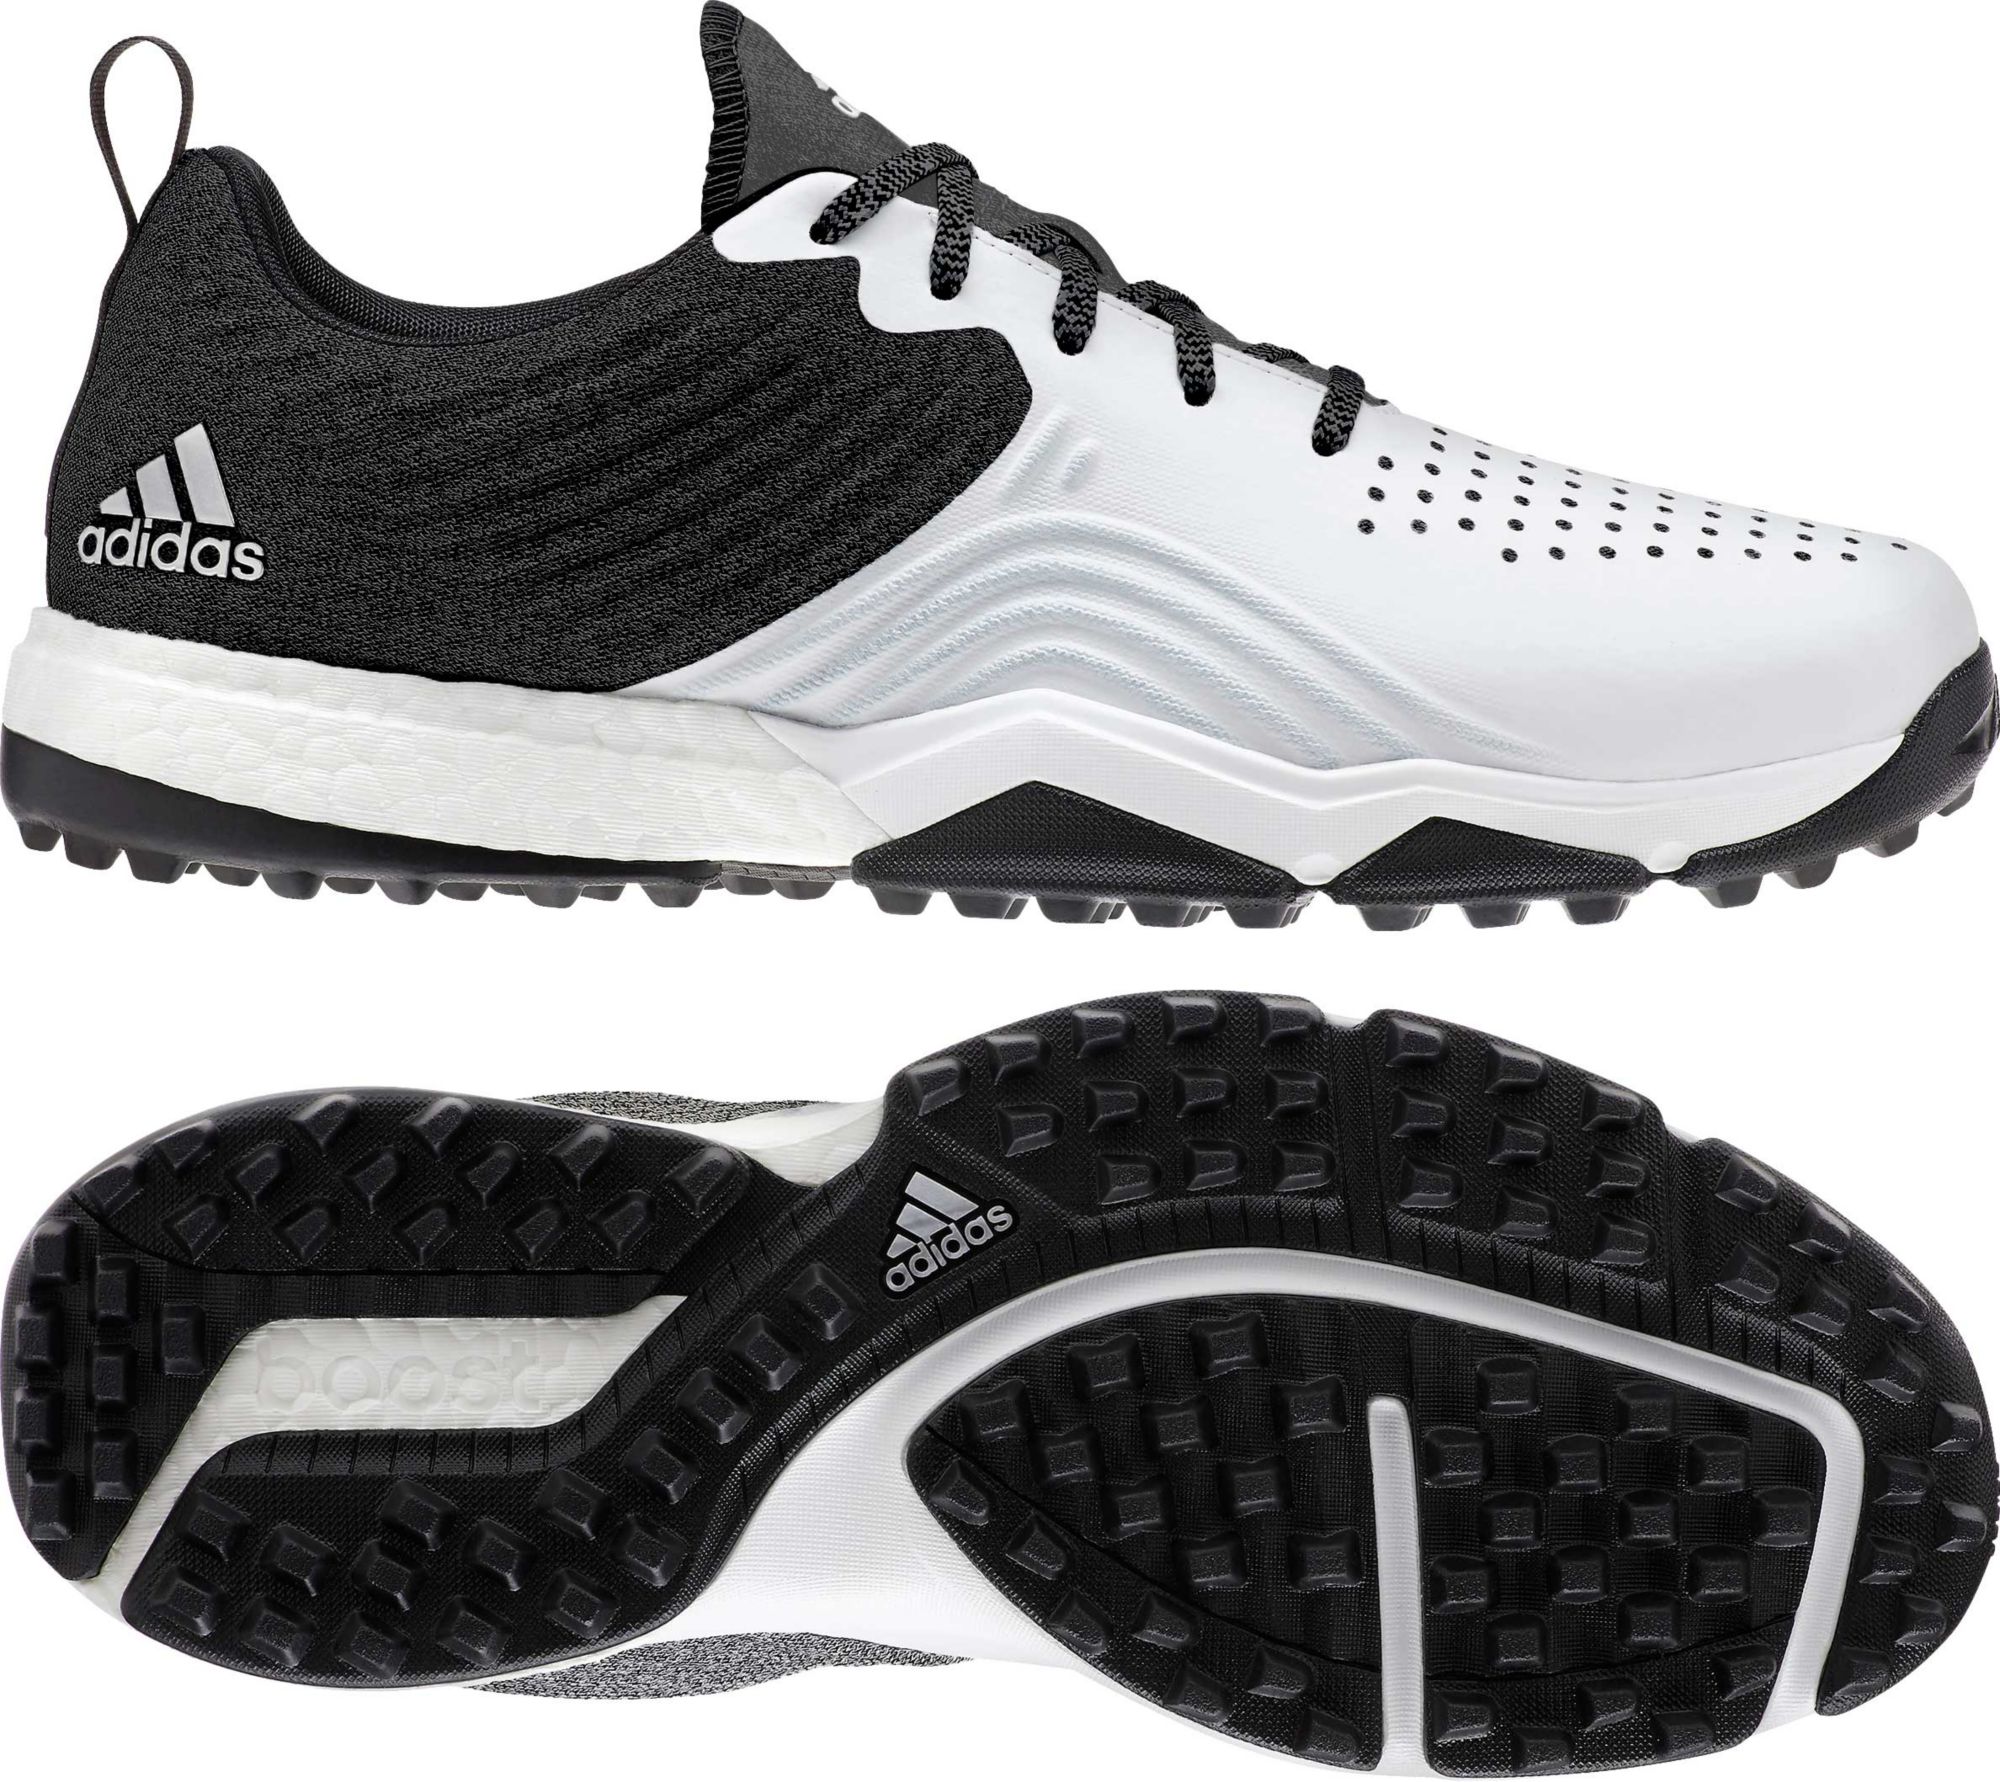 adipower 4orged s review